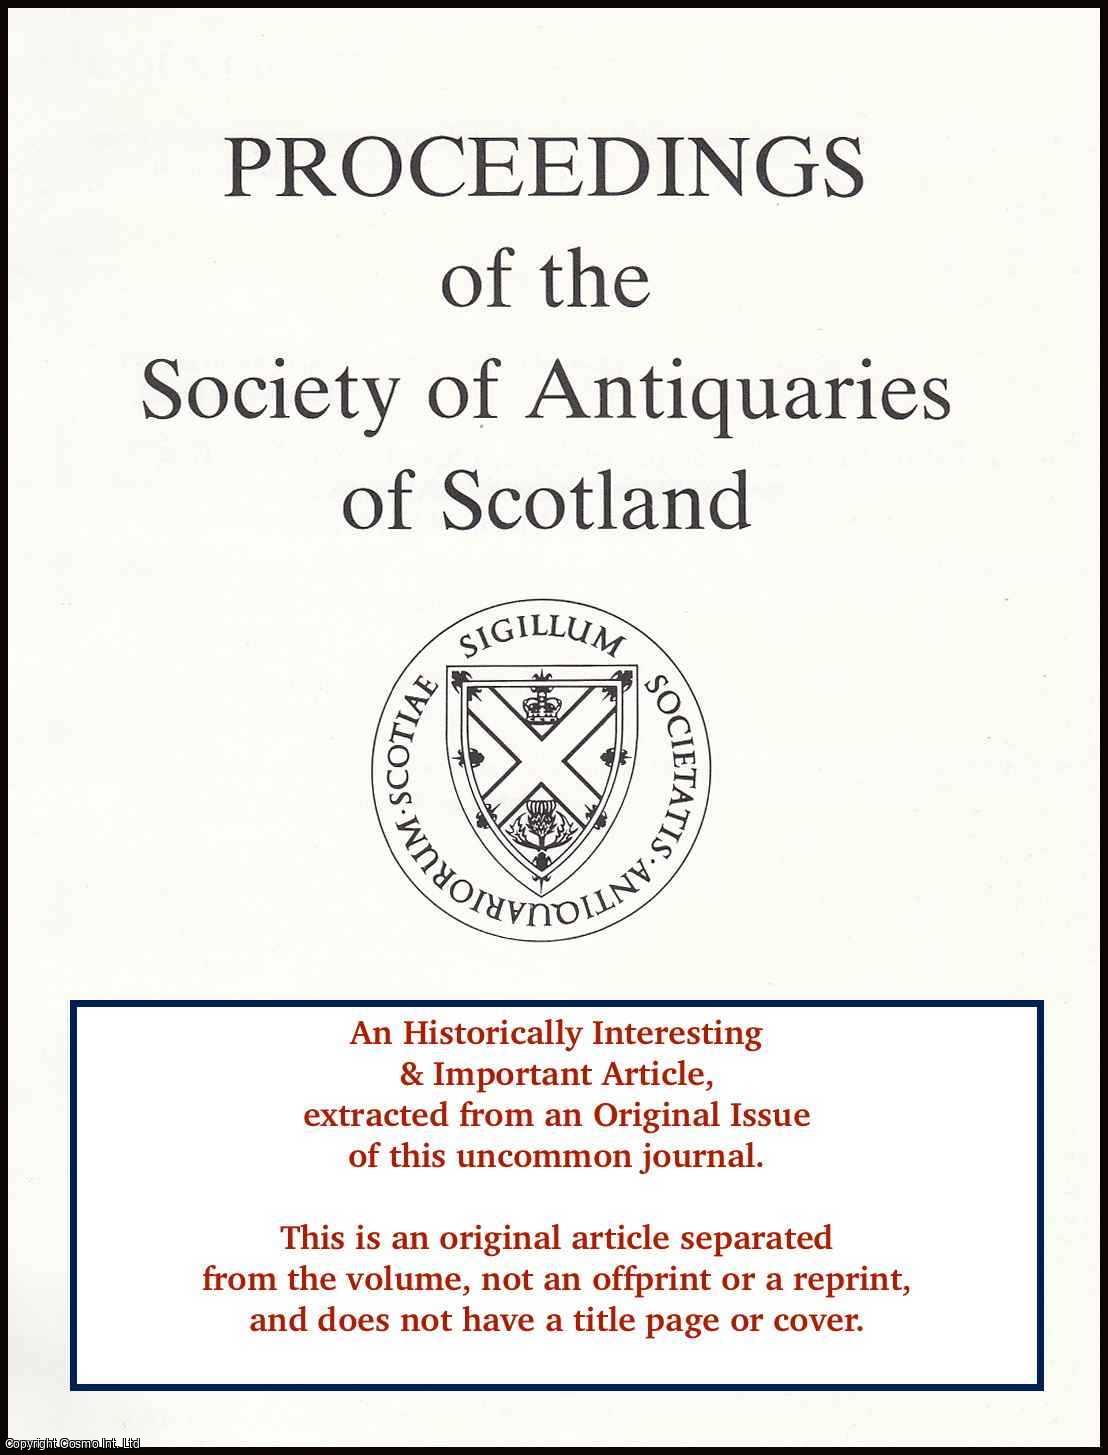 Adrian Cox & others - Backland Activities in Medieval Perth: Excavations at Meal Vennel and Scott Street. An original article from the Proceedings of the Society of Antiquaries of Scotland, 1996.